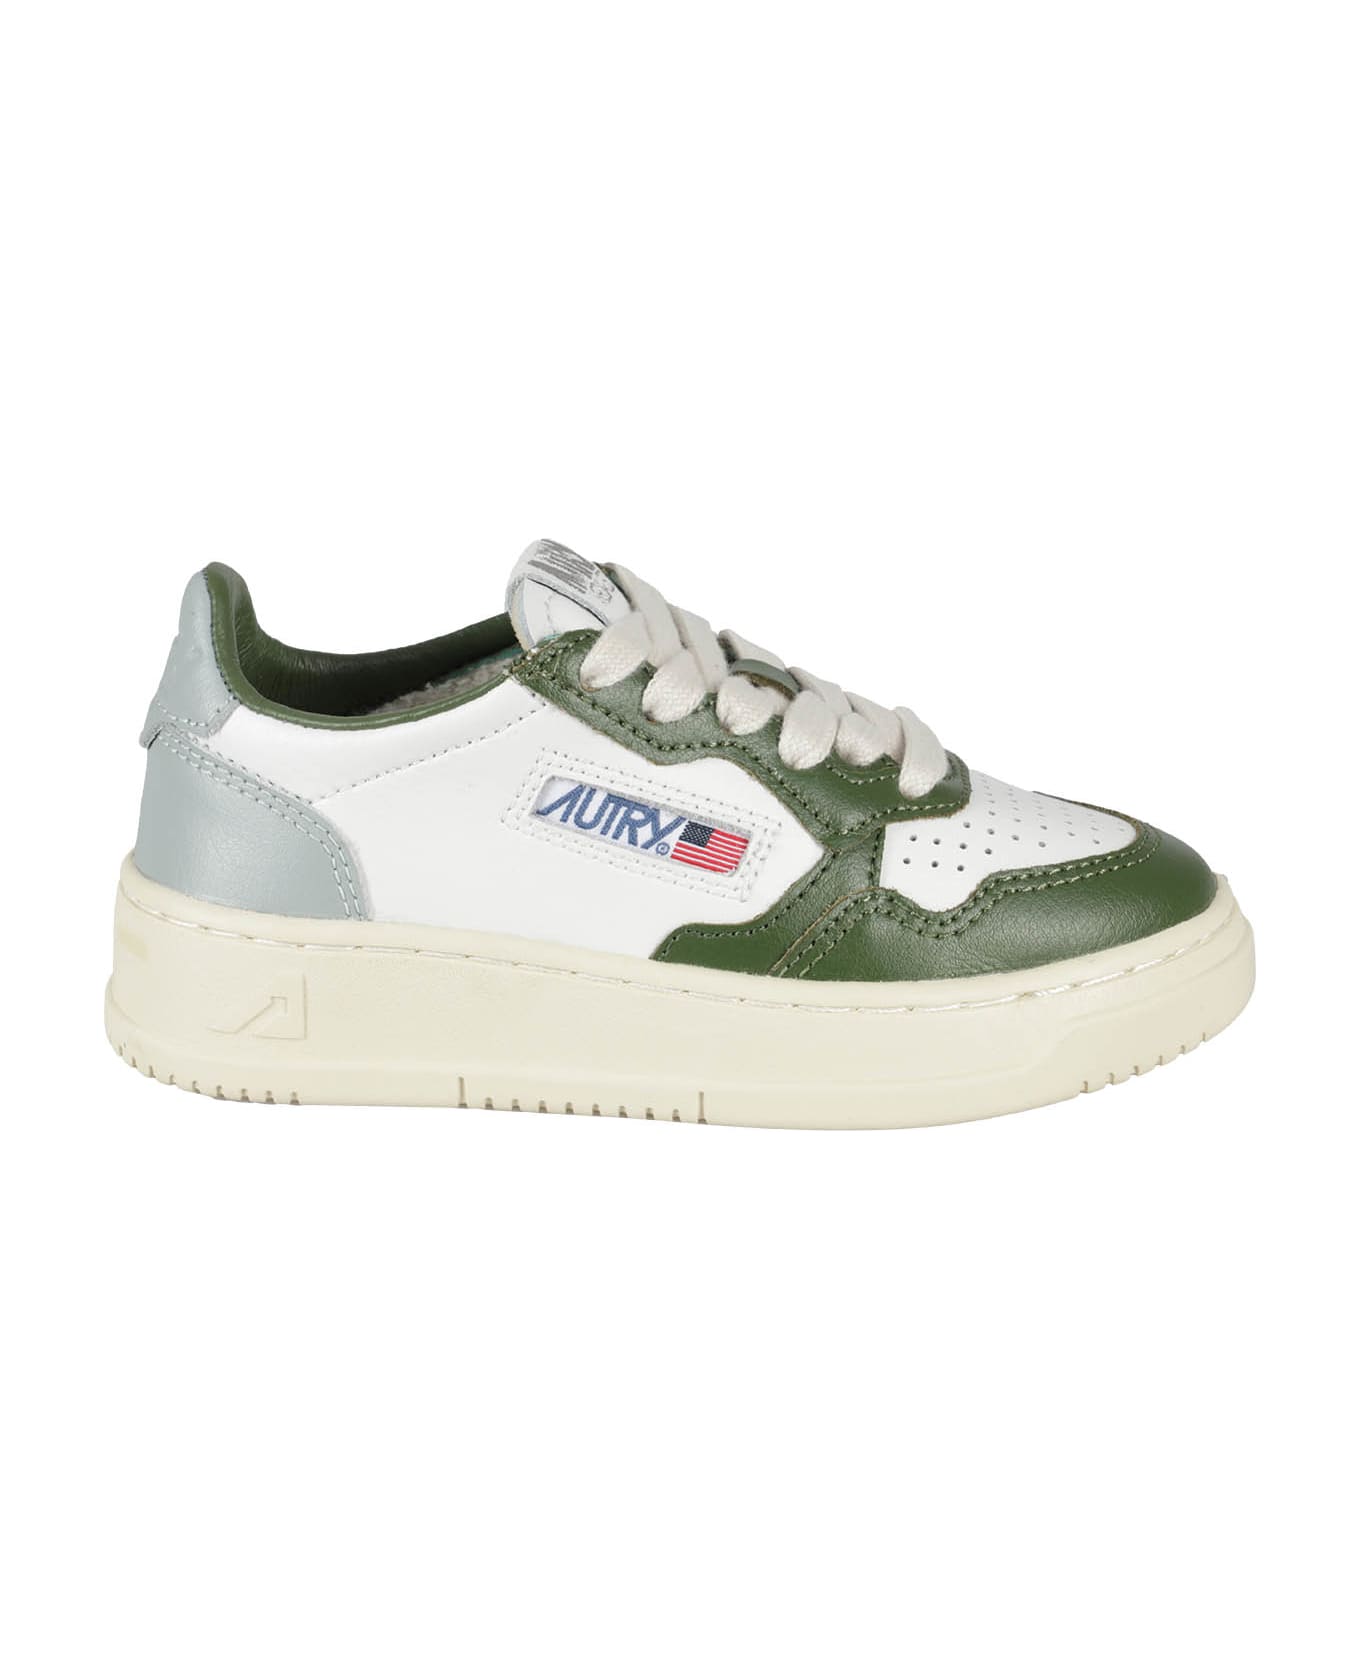 Autry Medalist - Grey Military Green シューズ